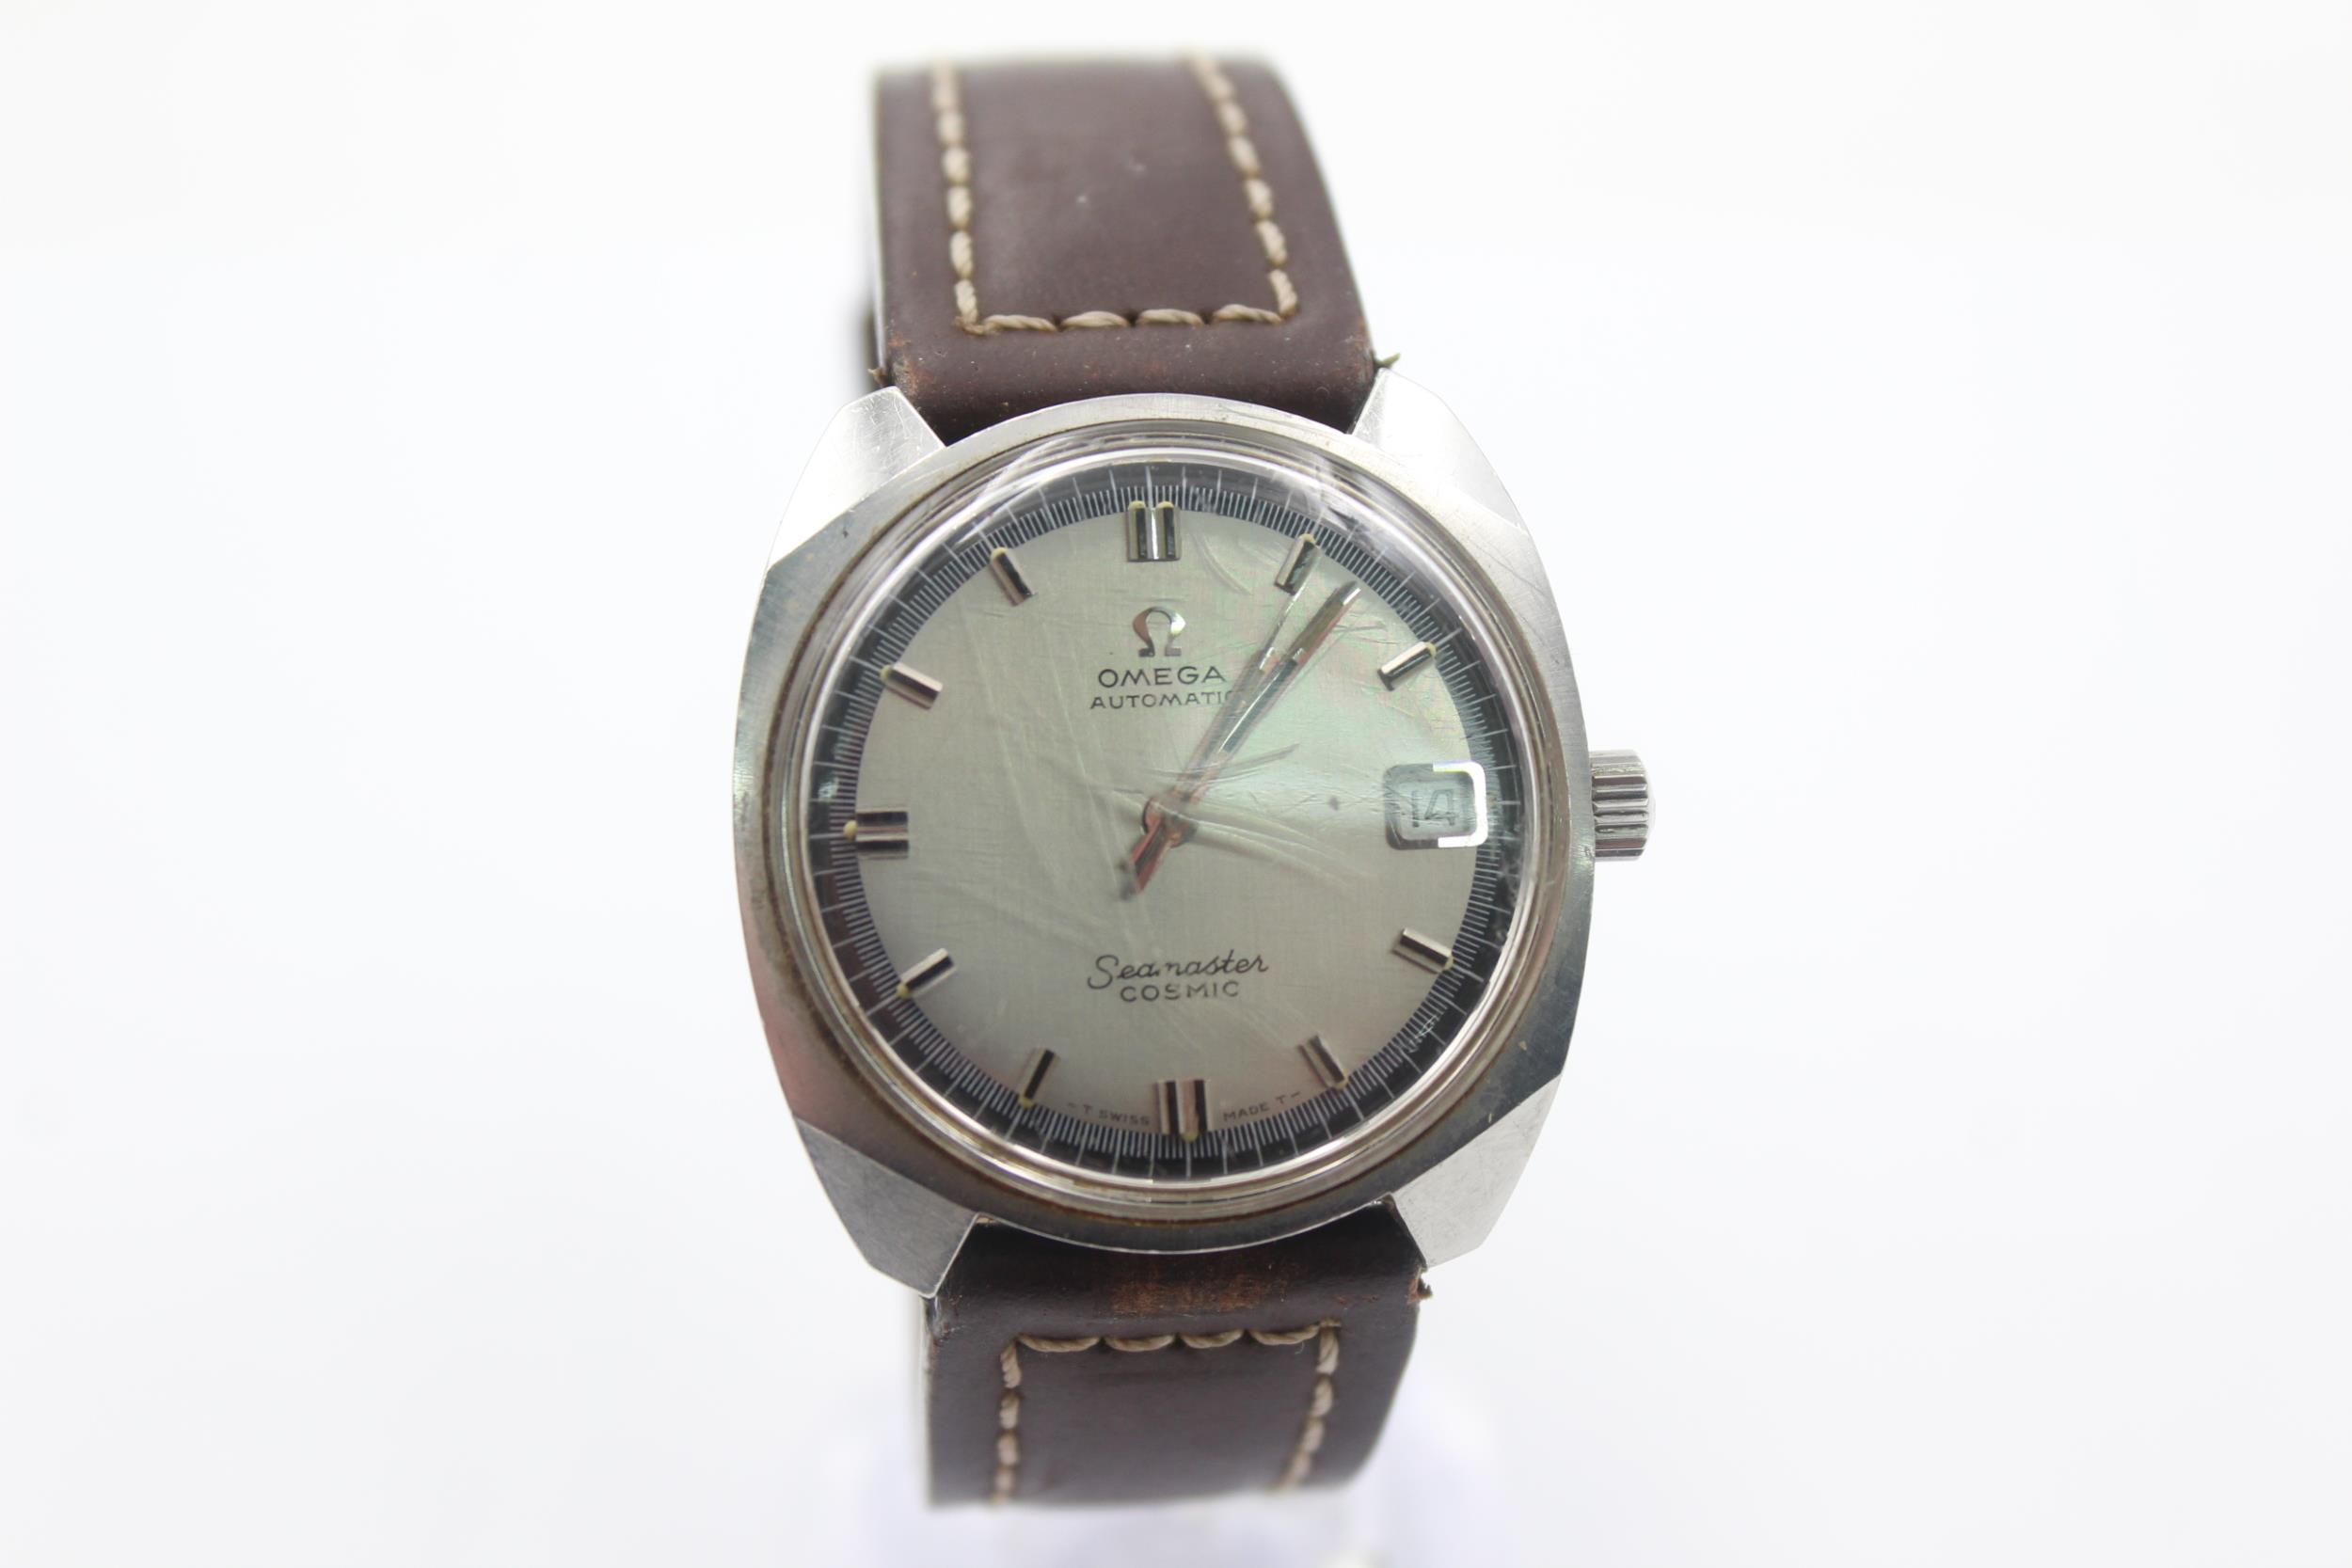 Vintage Gents OMEGA SEAMASTER COSMIC C.1970s WRISTWATCH Automatic WORKING